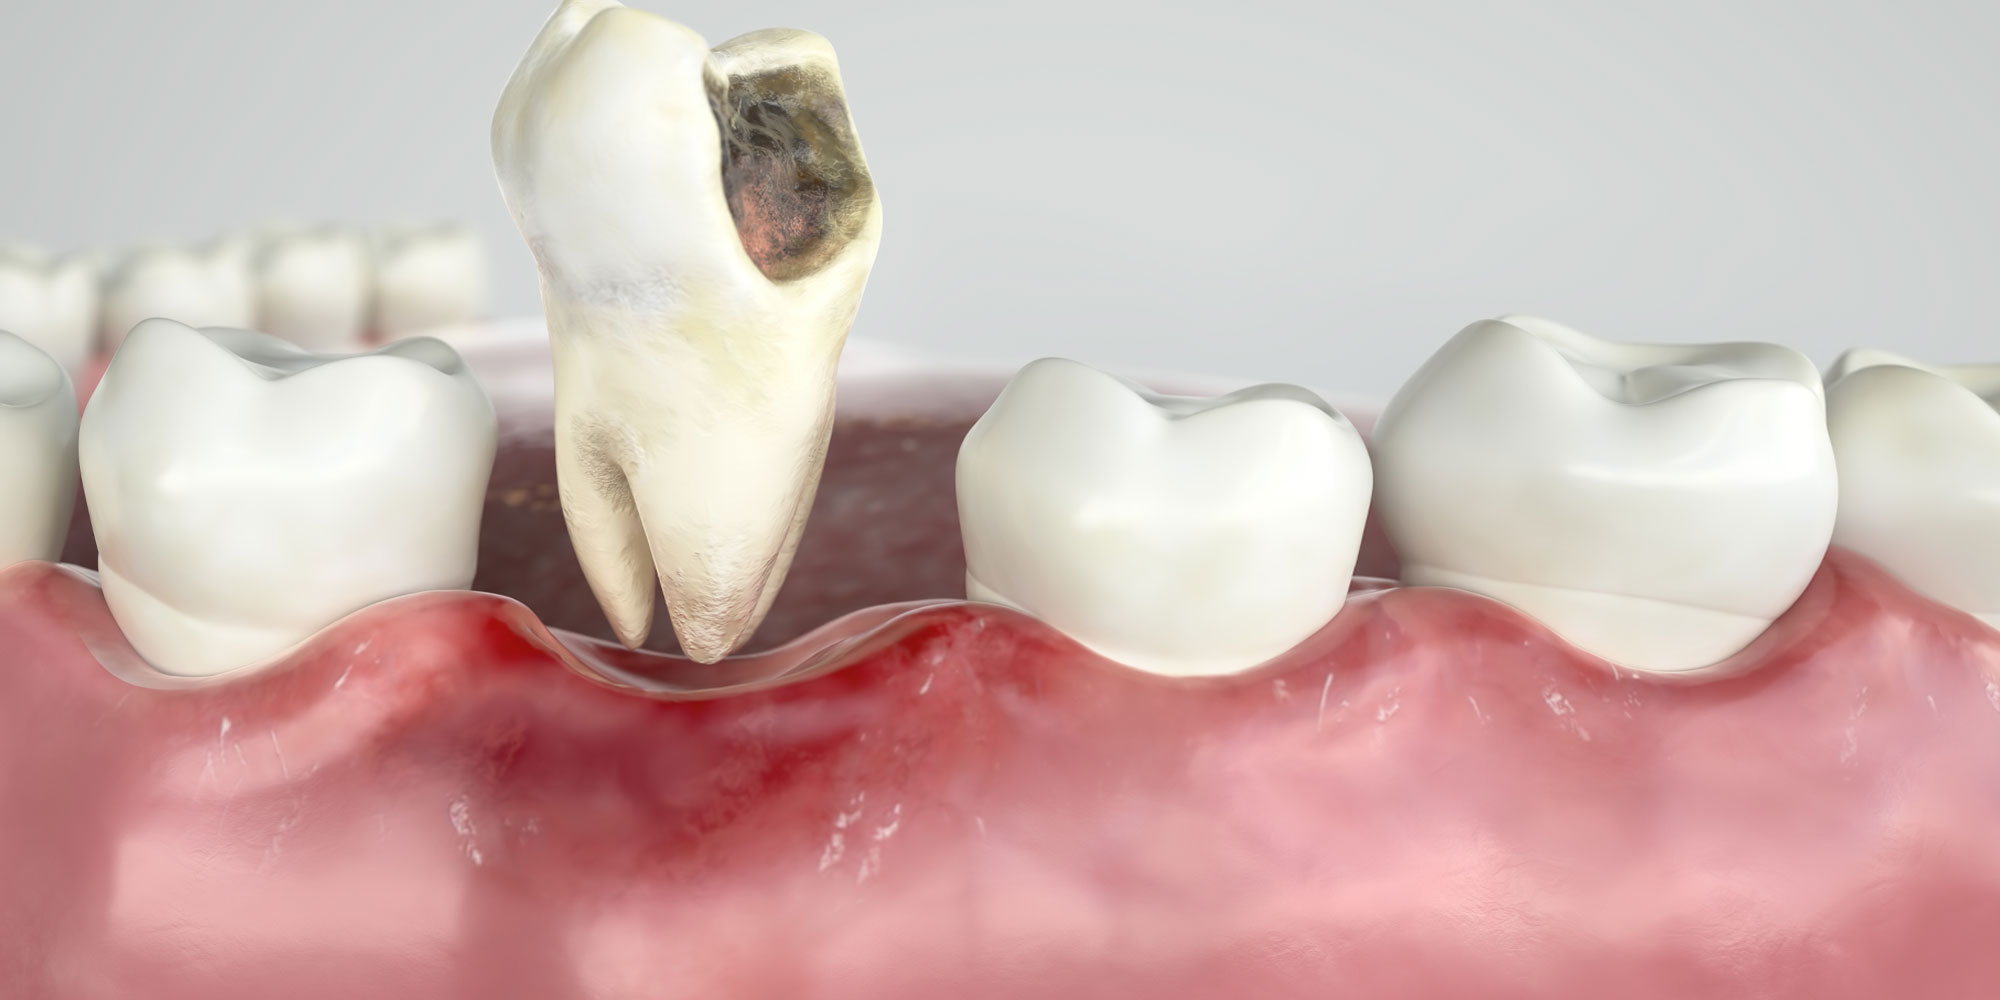 Will a Decayed Tooth Fall Out? Don't Wait for It, Act Now!